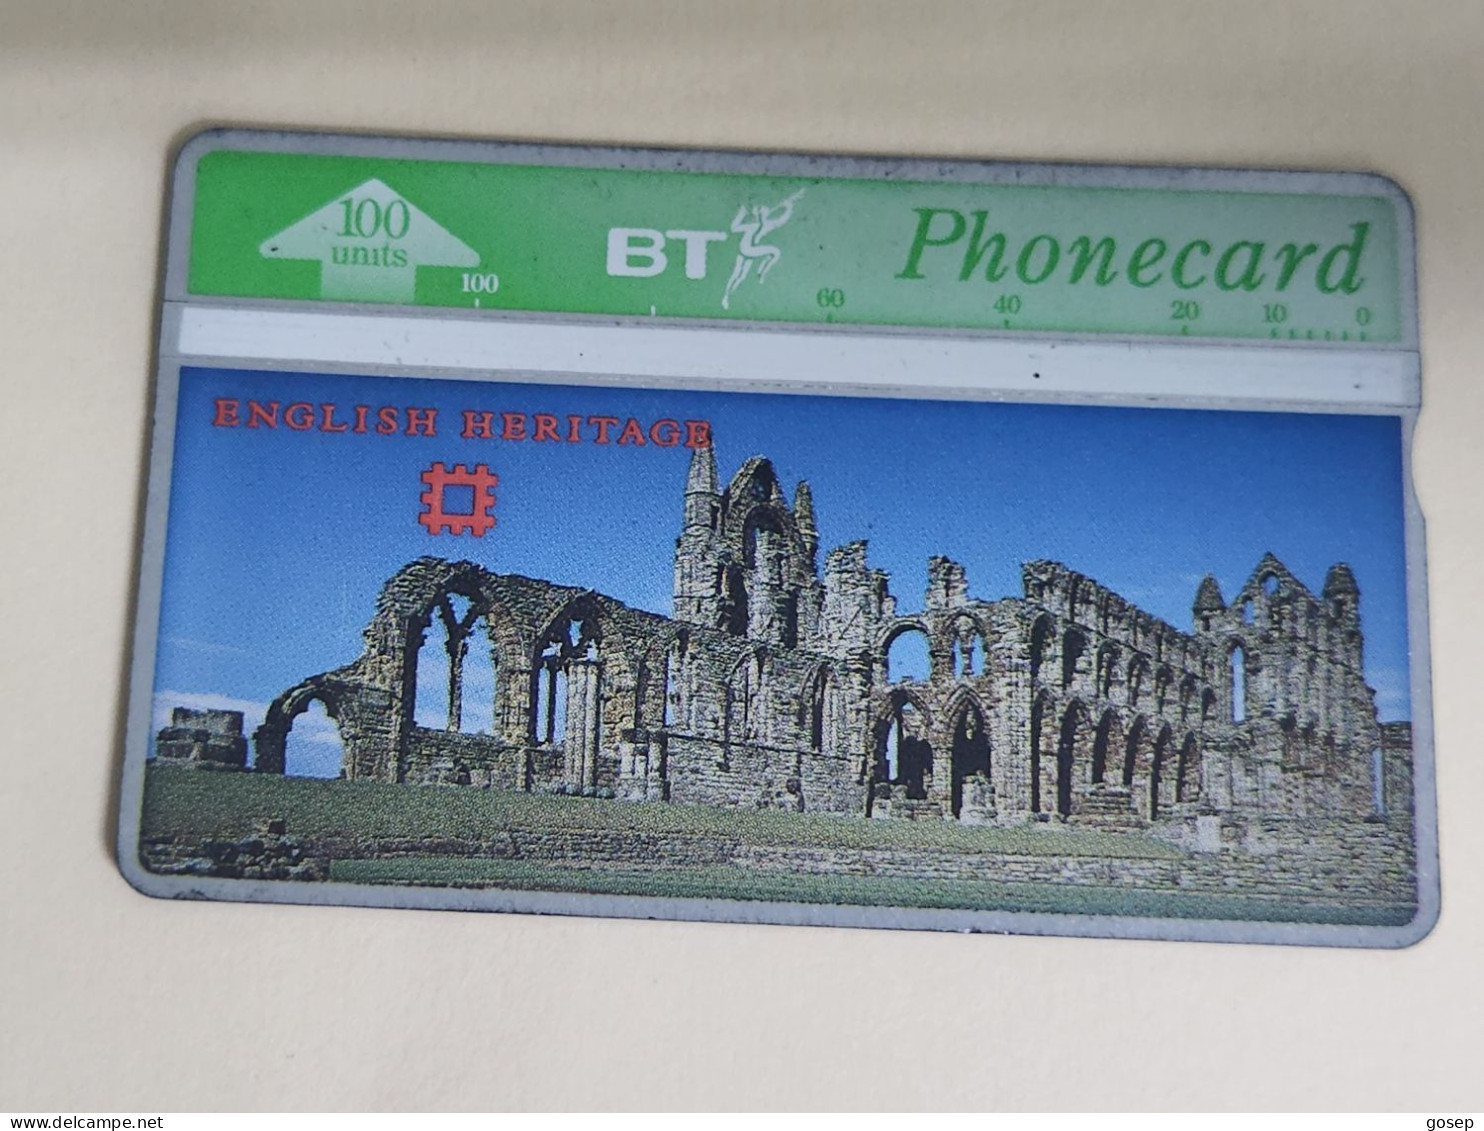 United Kingdom-(BTA122)-HERITAGE-Whitby Abbey-(217)(100units)(527H30198)price Cataloge3.00£-used+1card Prepiad Free - BT Advertising Issues